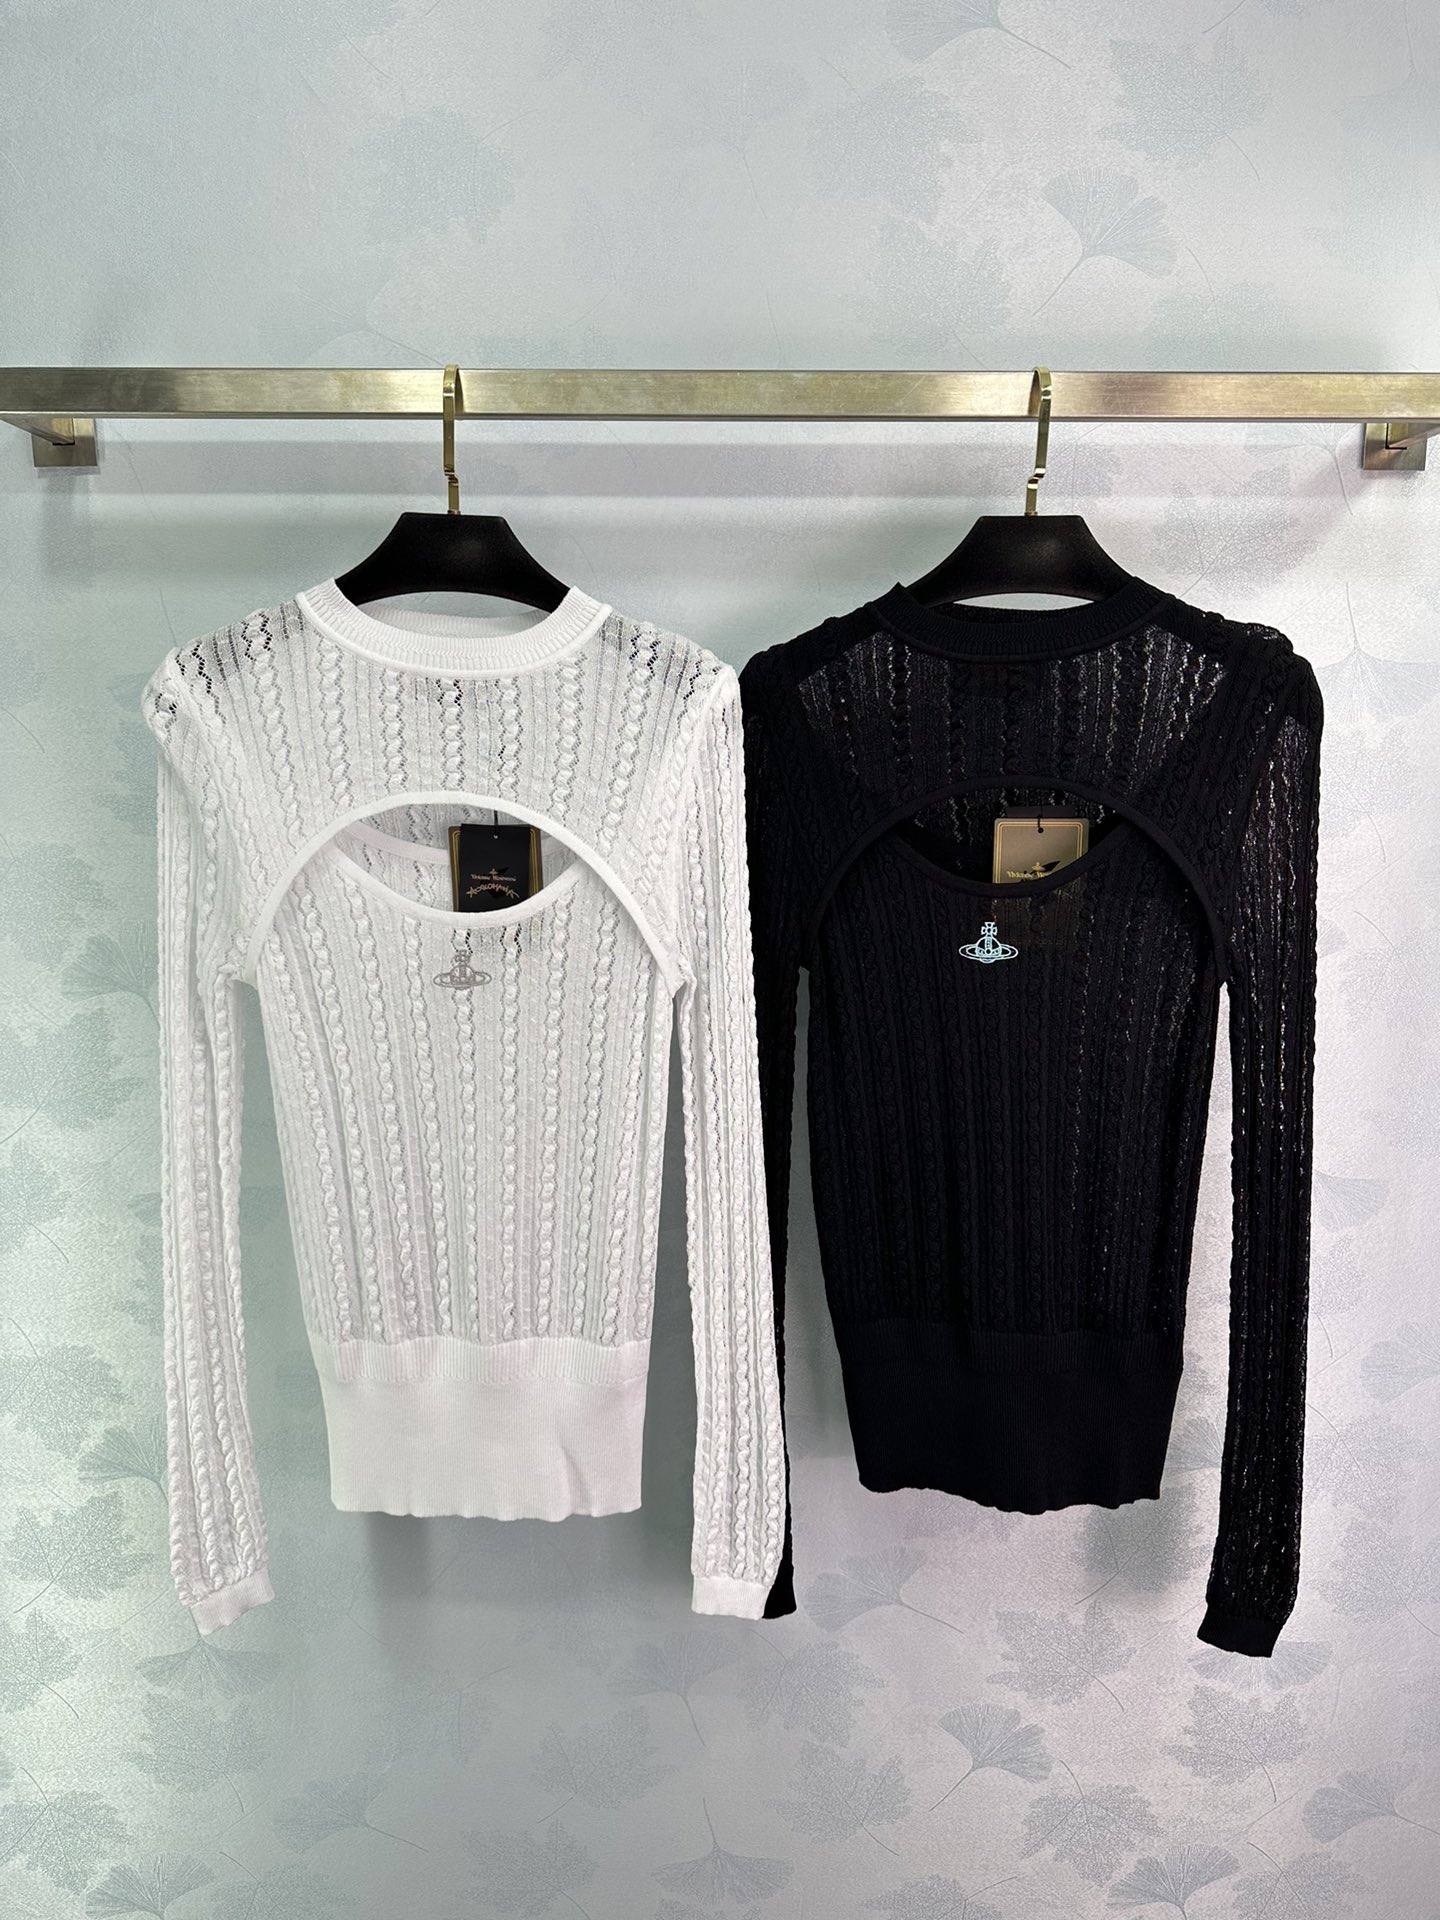 Vivienne Westwood Clothing Shirts & Blouses White Embroidery Cashmere Knitting Spring/Summer Collection